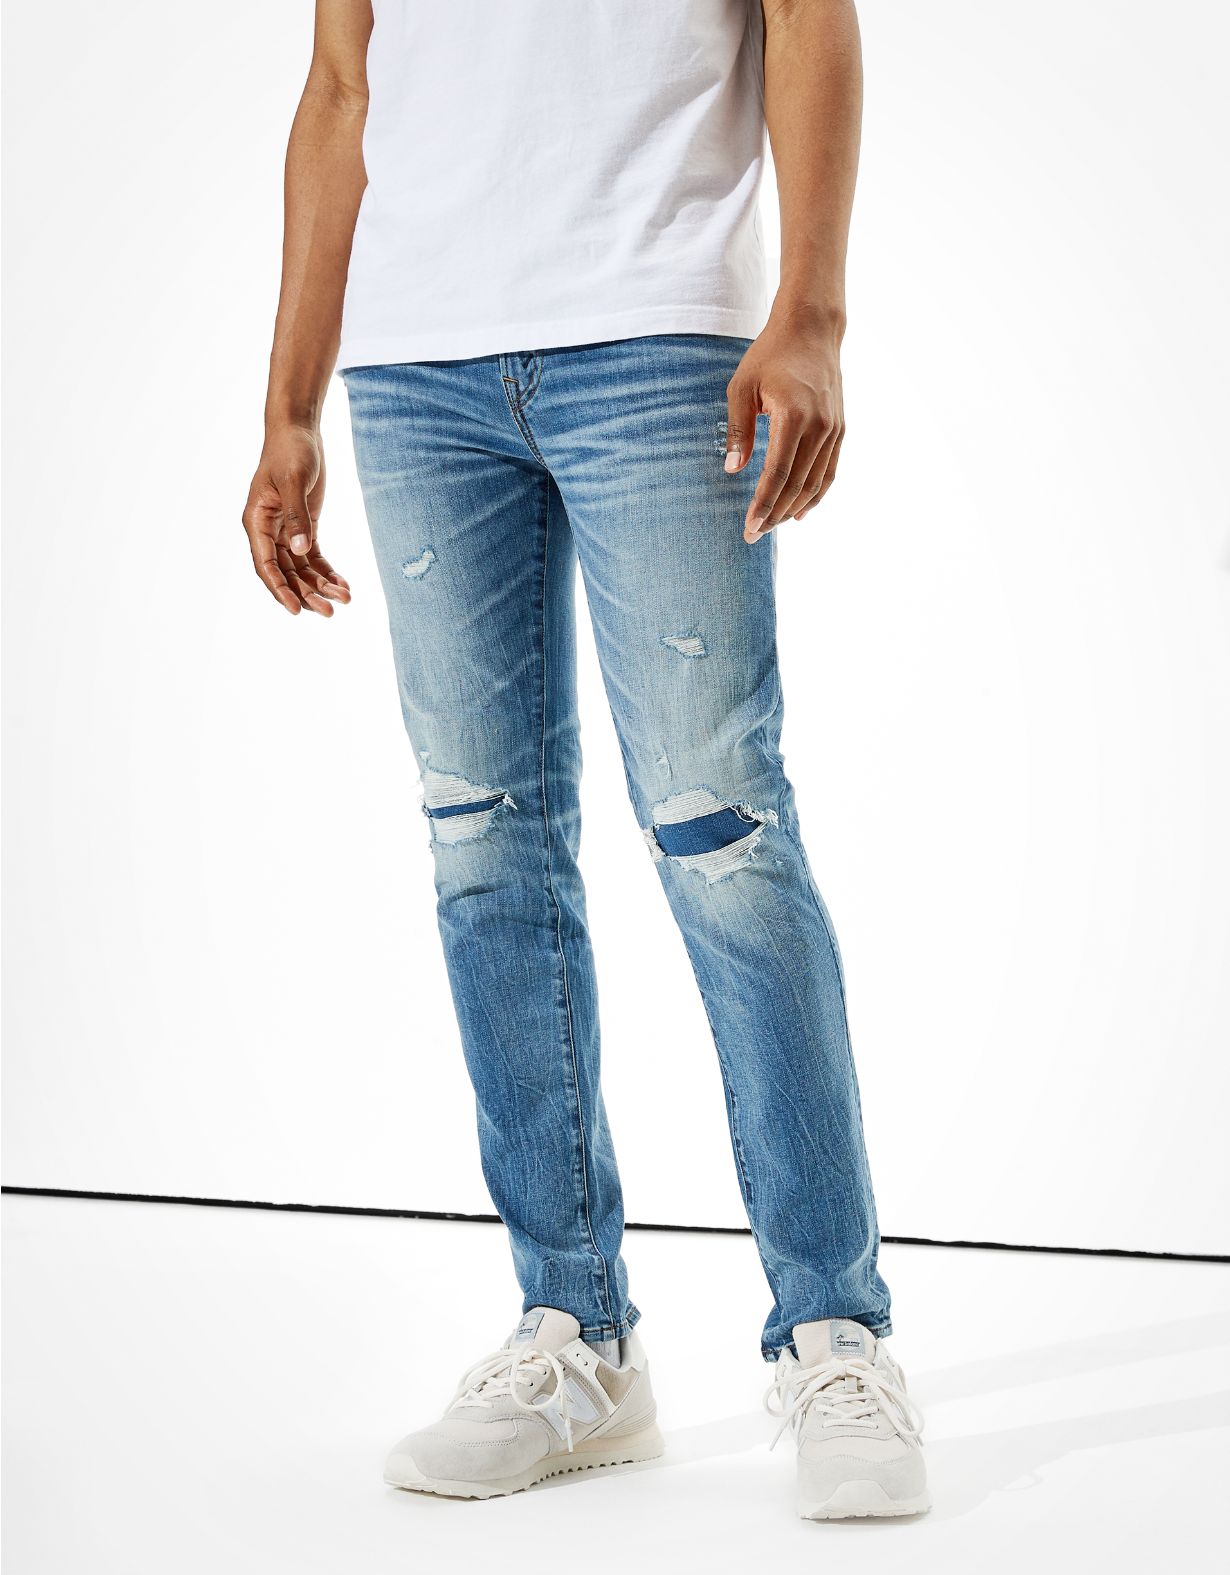 AE Cozy AirFlex+ Patched Skinny Jean